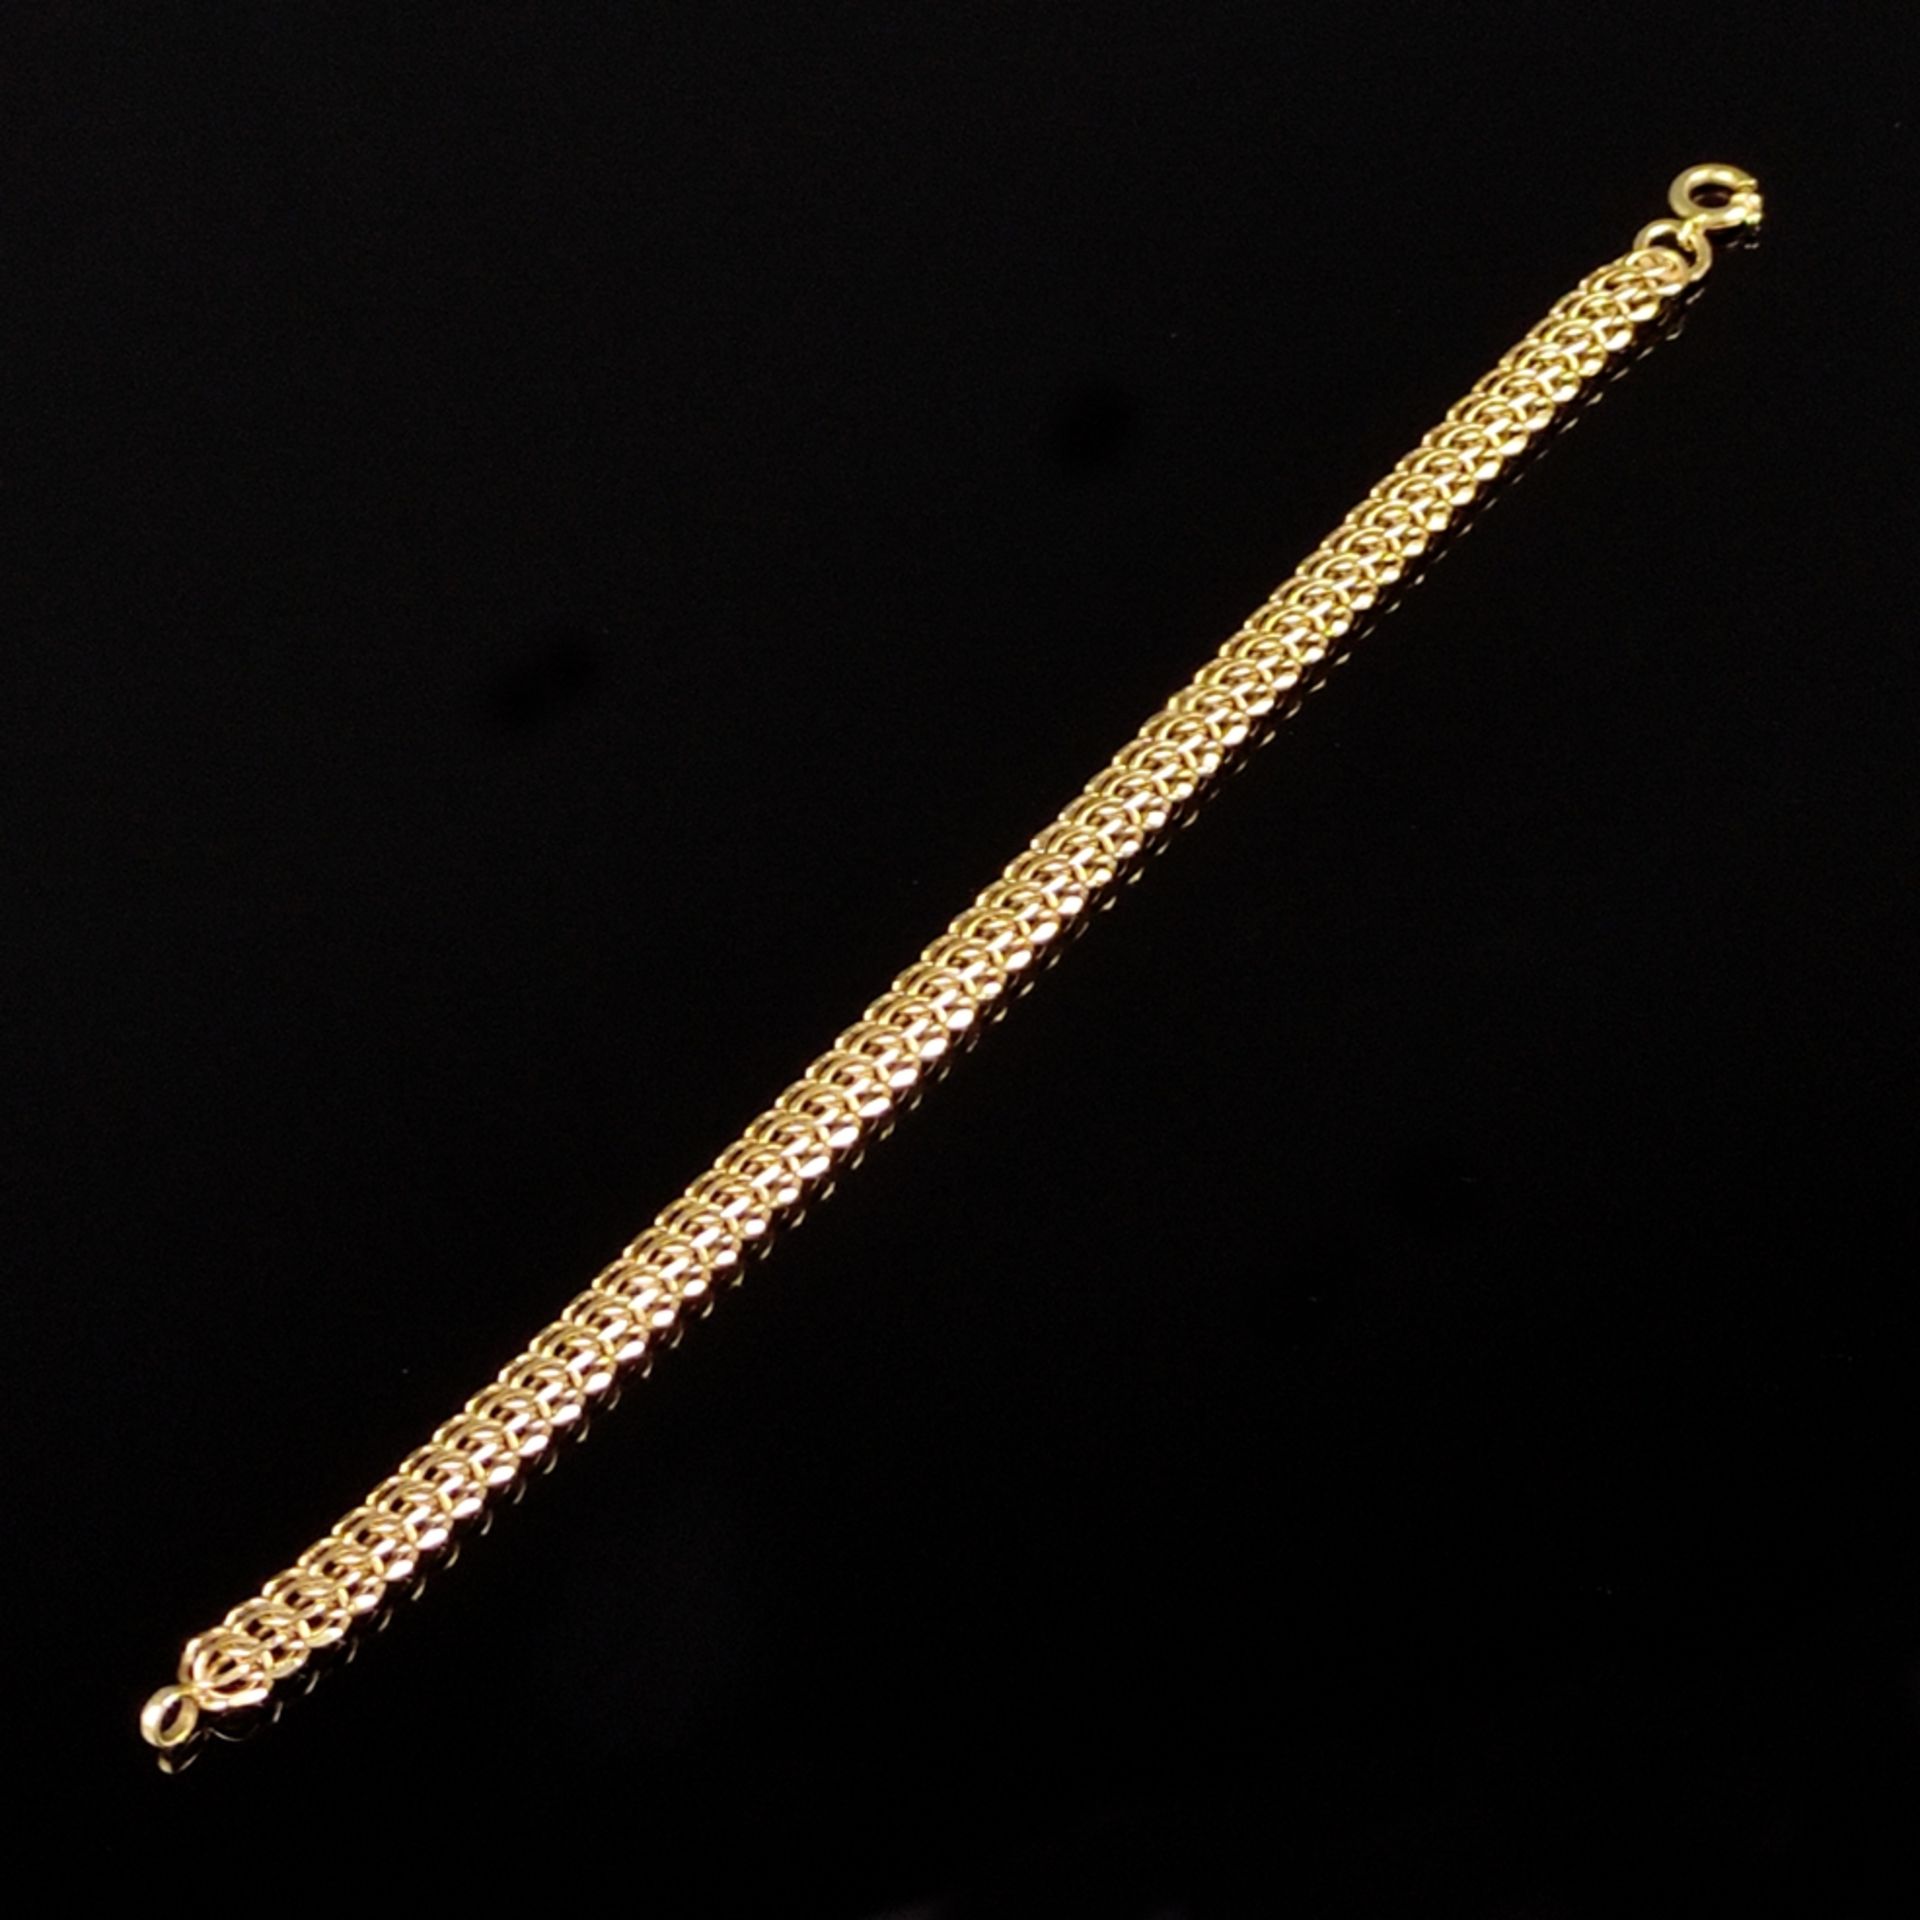 Bracelet, 585/14K yellow gold (hallmarked), 16,17g, flexible band made of different ring-shaped ele - Image 2 of 3